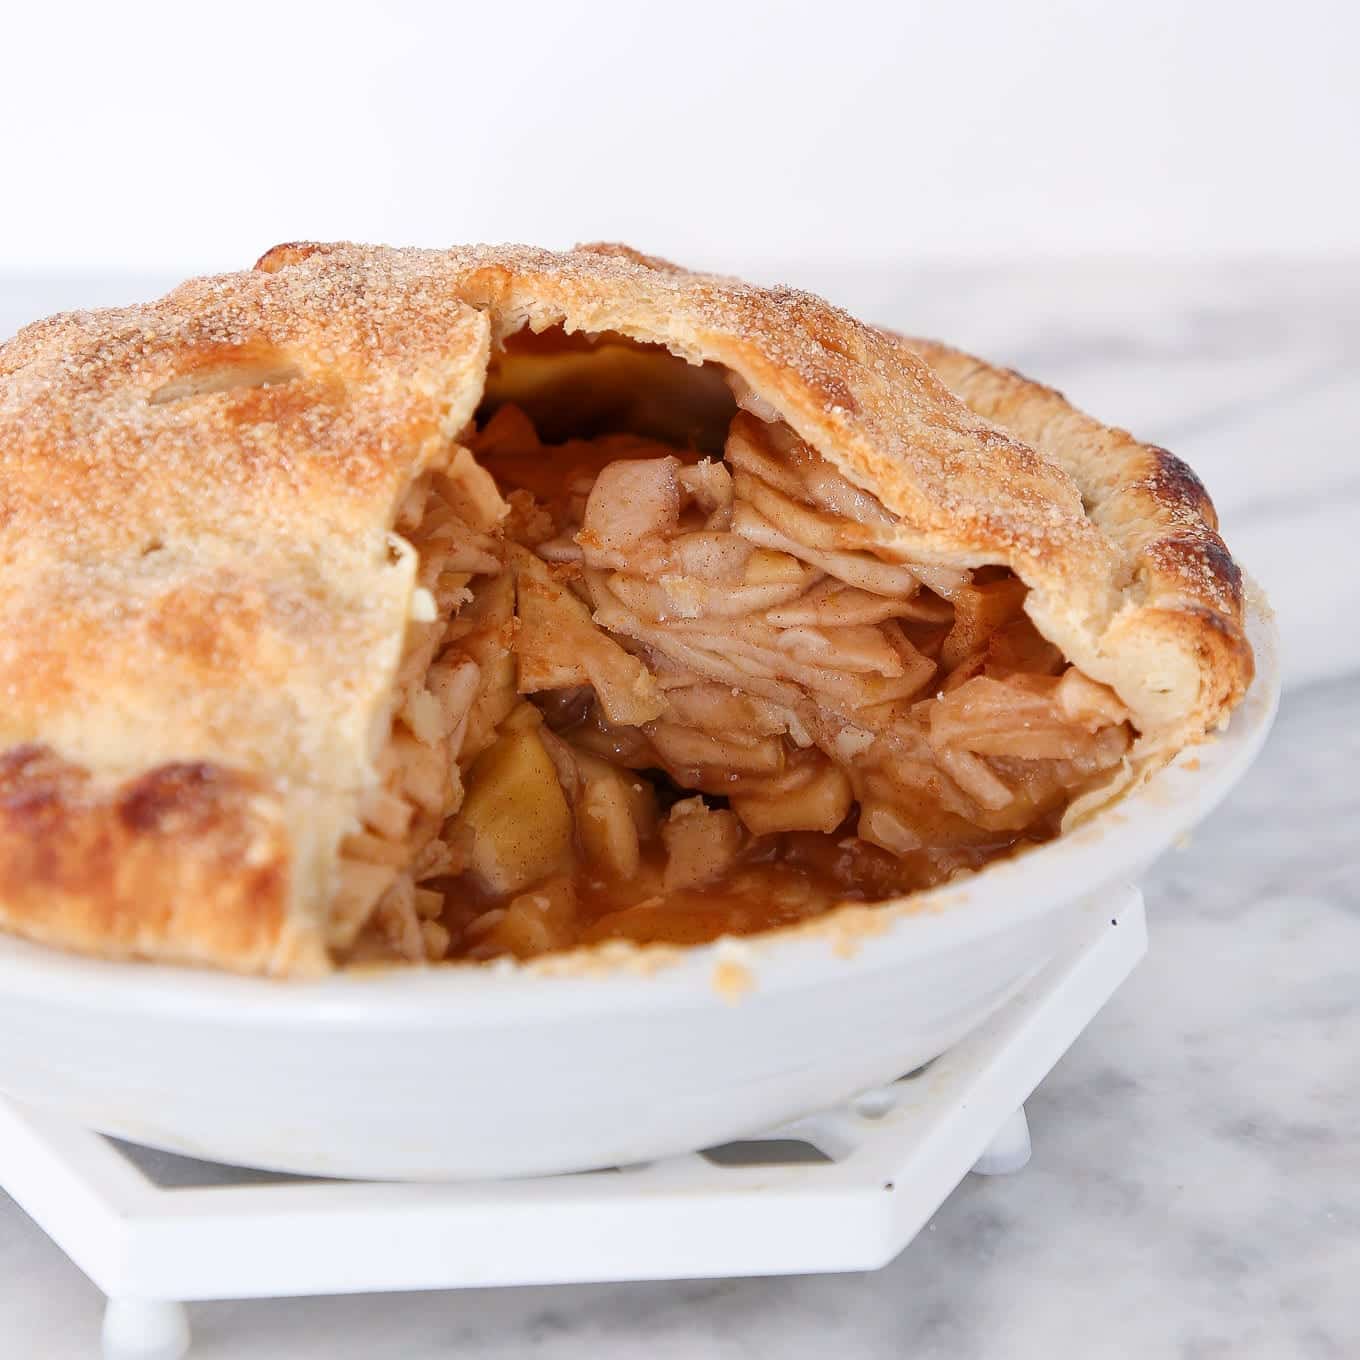 A whole apple pie with a slice removed.